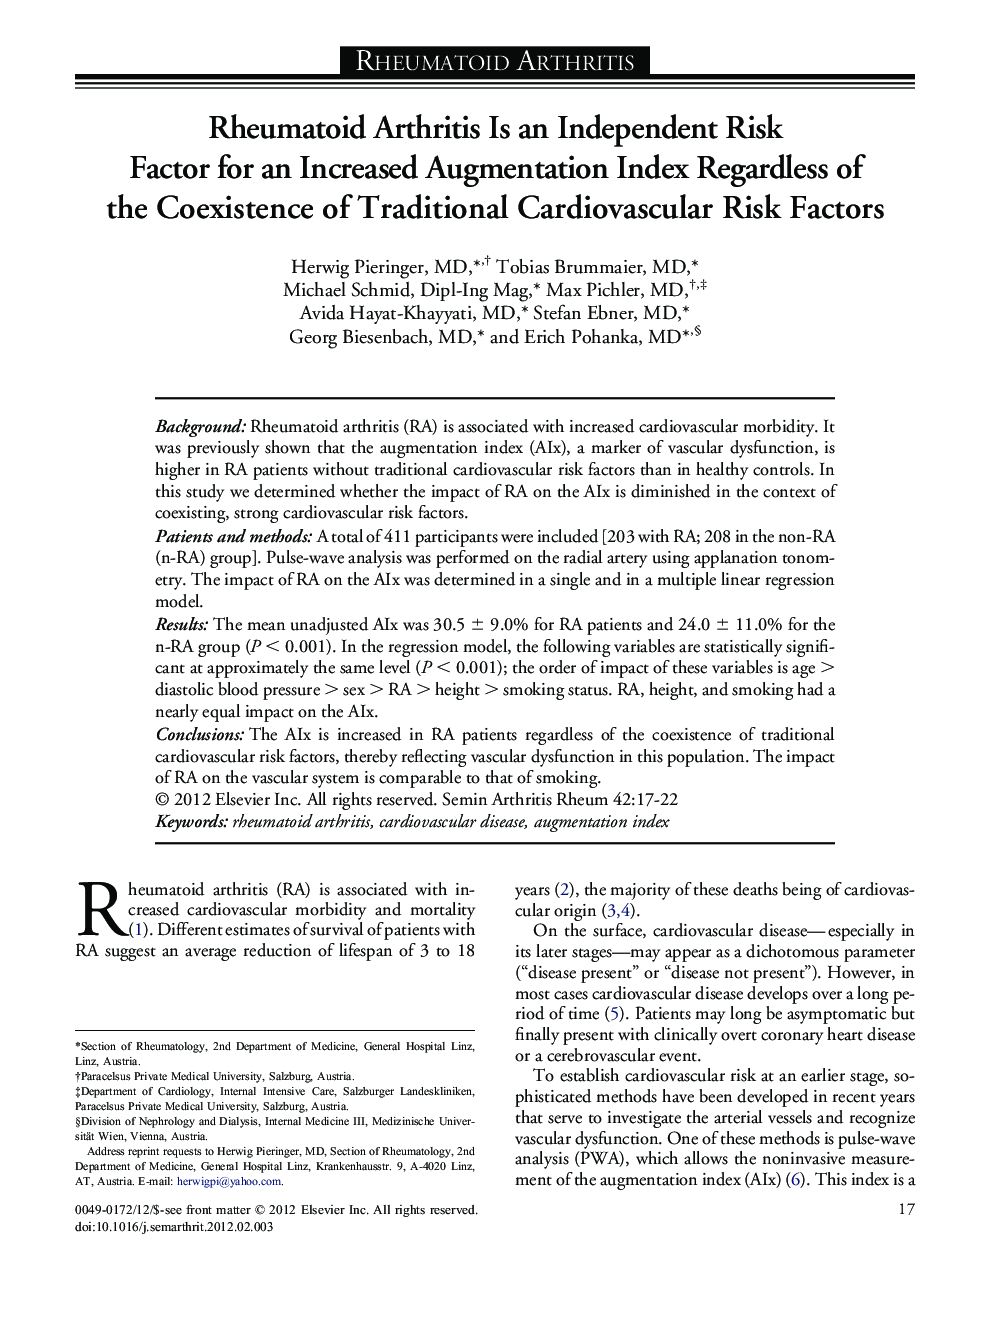 Rheumatoid Arthritis Is an Independent Risk Factor for an Increased Augmentation Index Regardless of the Coexistence of Traditional Cardiovascular Risk Factors